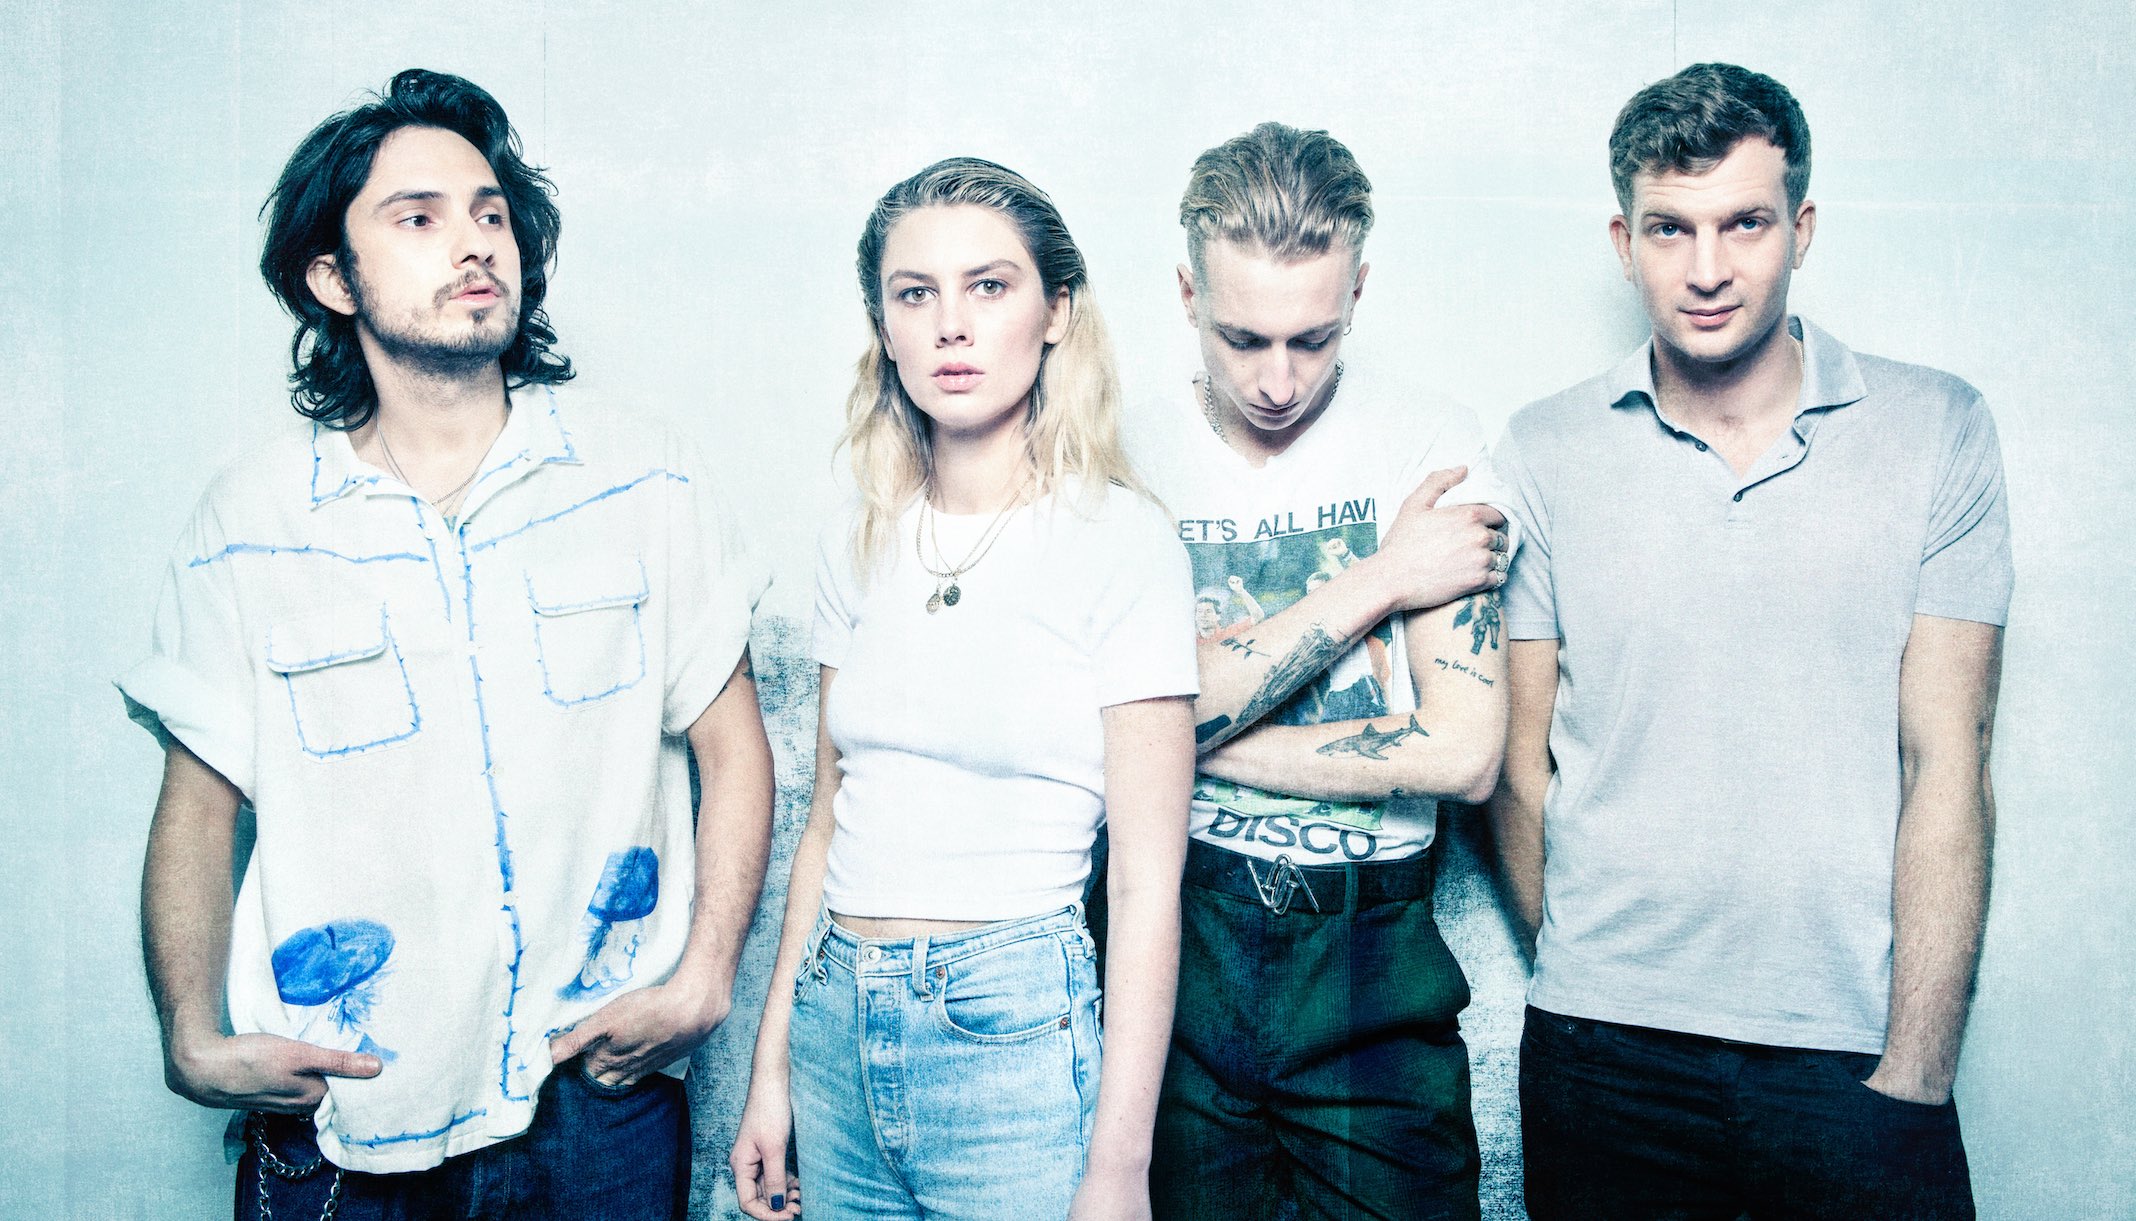 wolf alice blue weekend tour